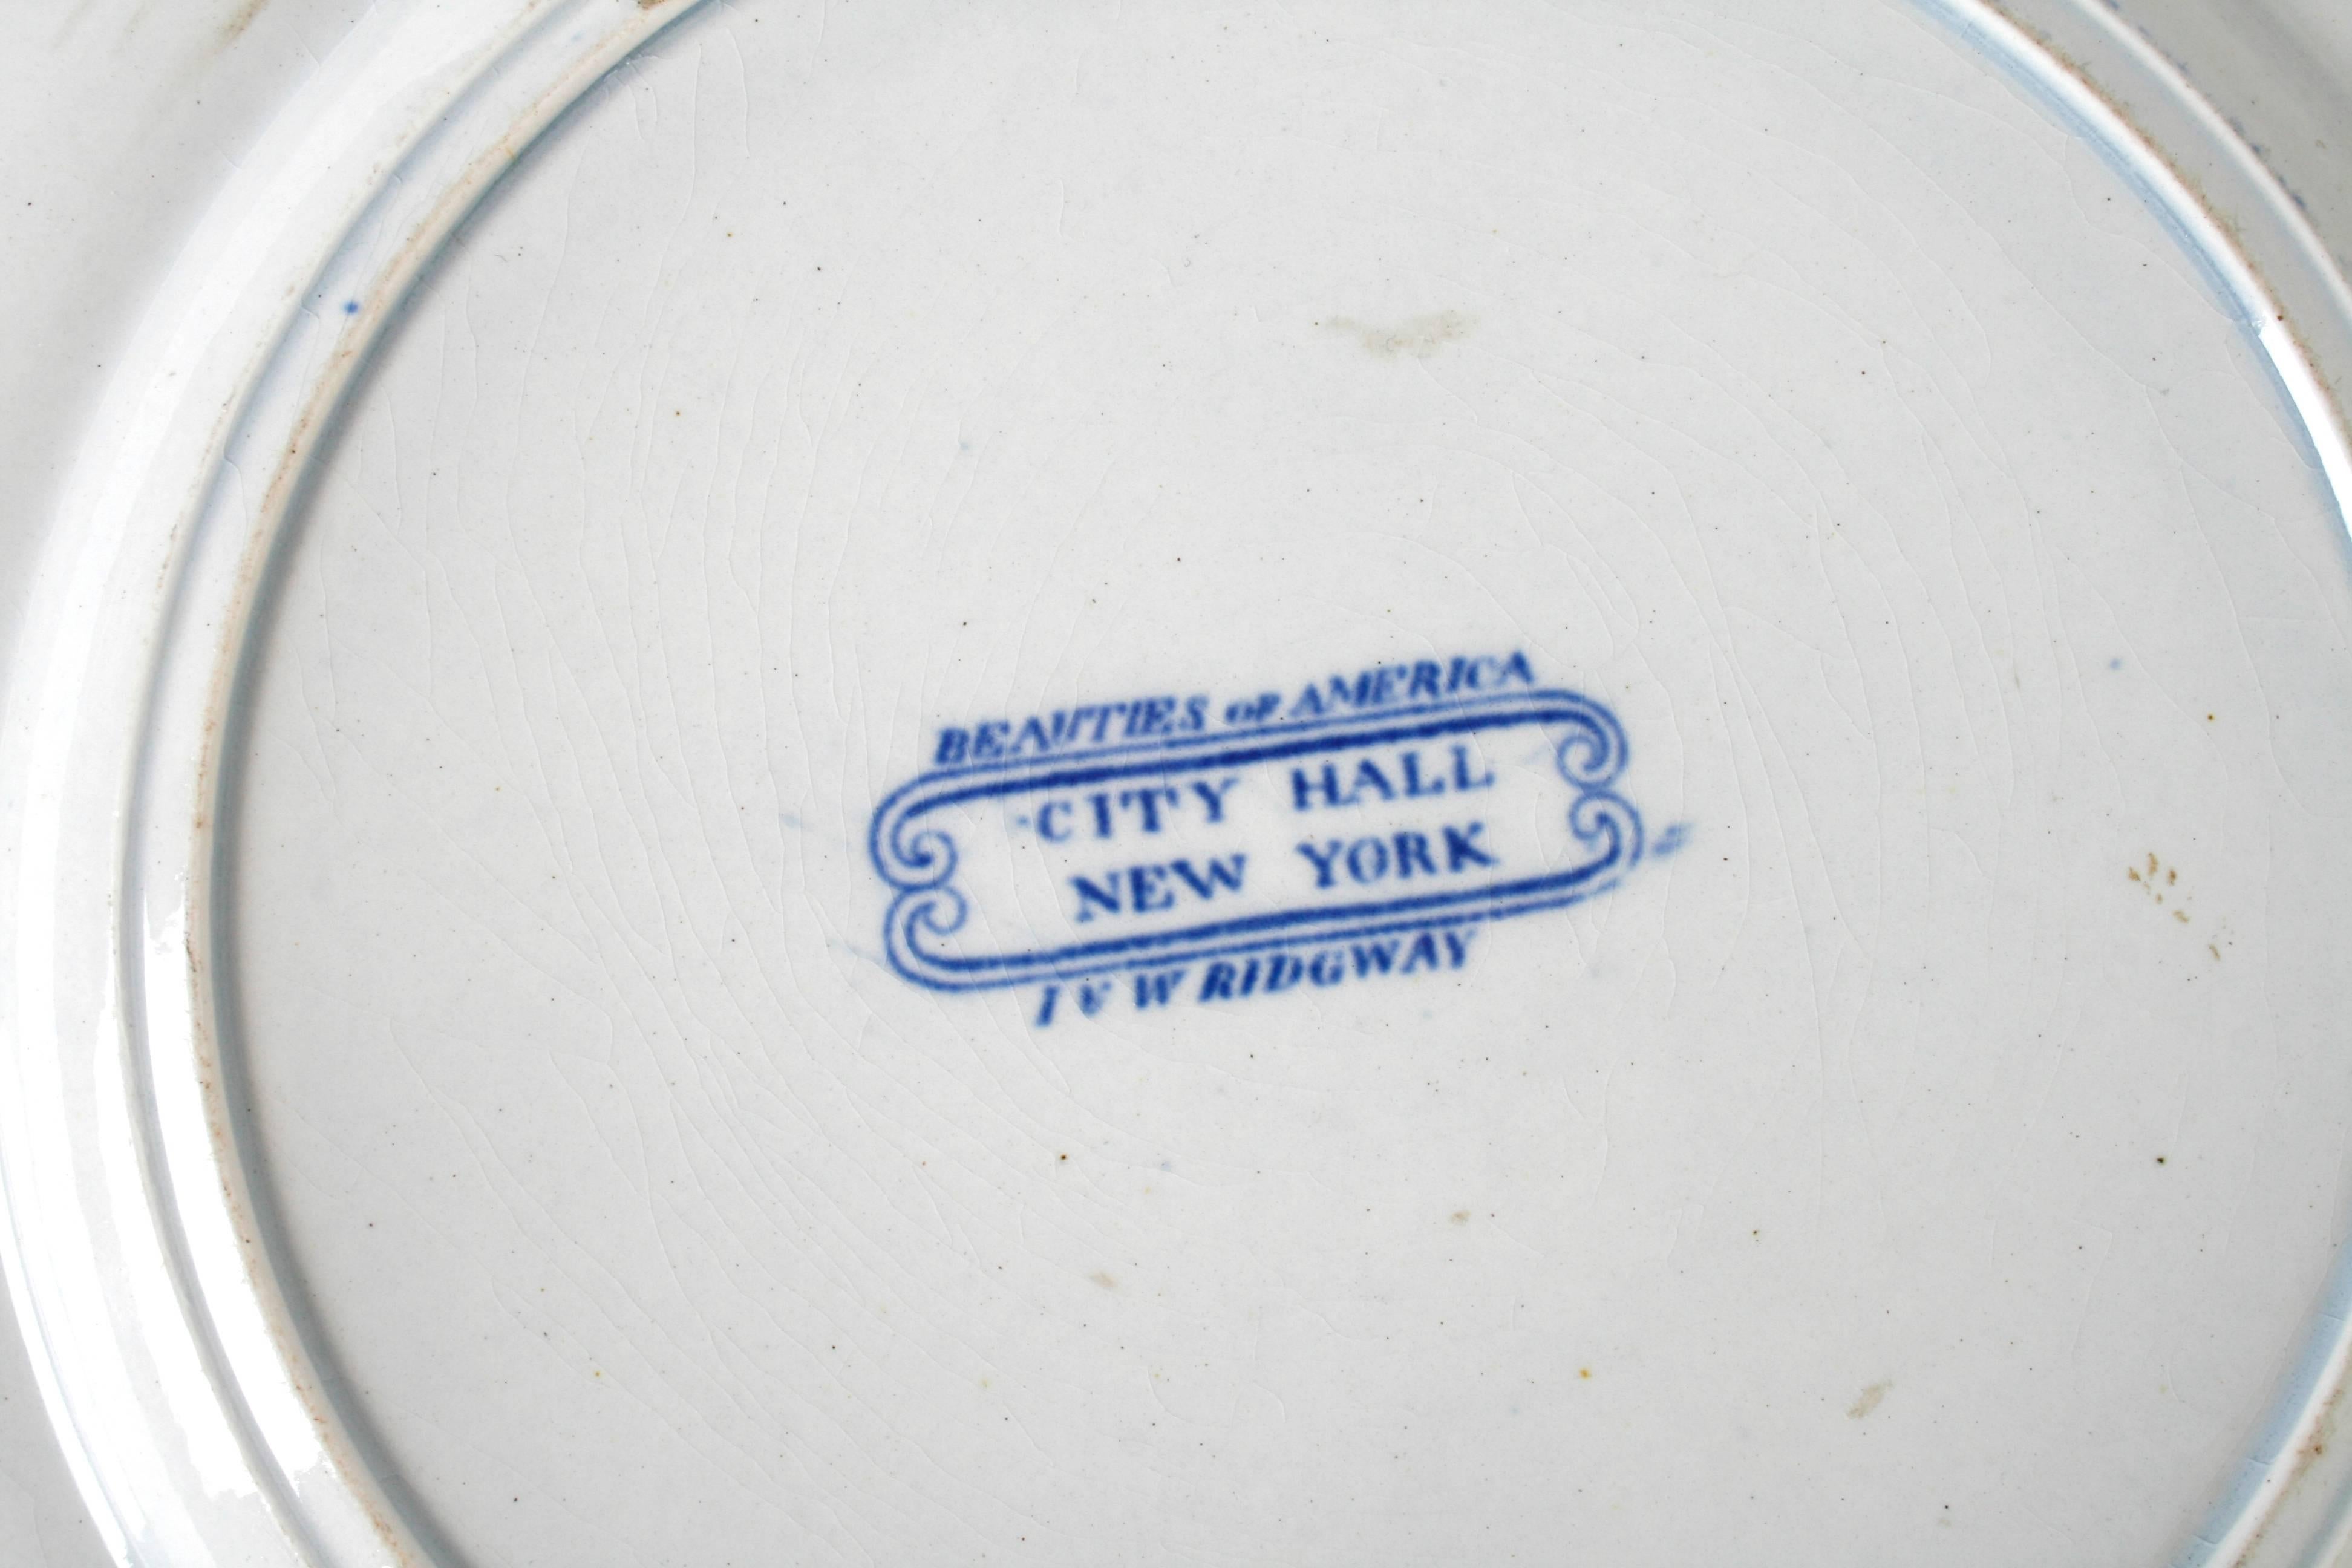 Earthenware City Hall New York Blue Staffordshire Plate by J & W Ridgway